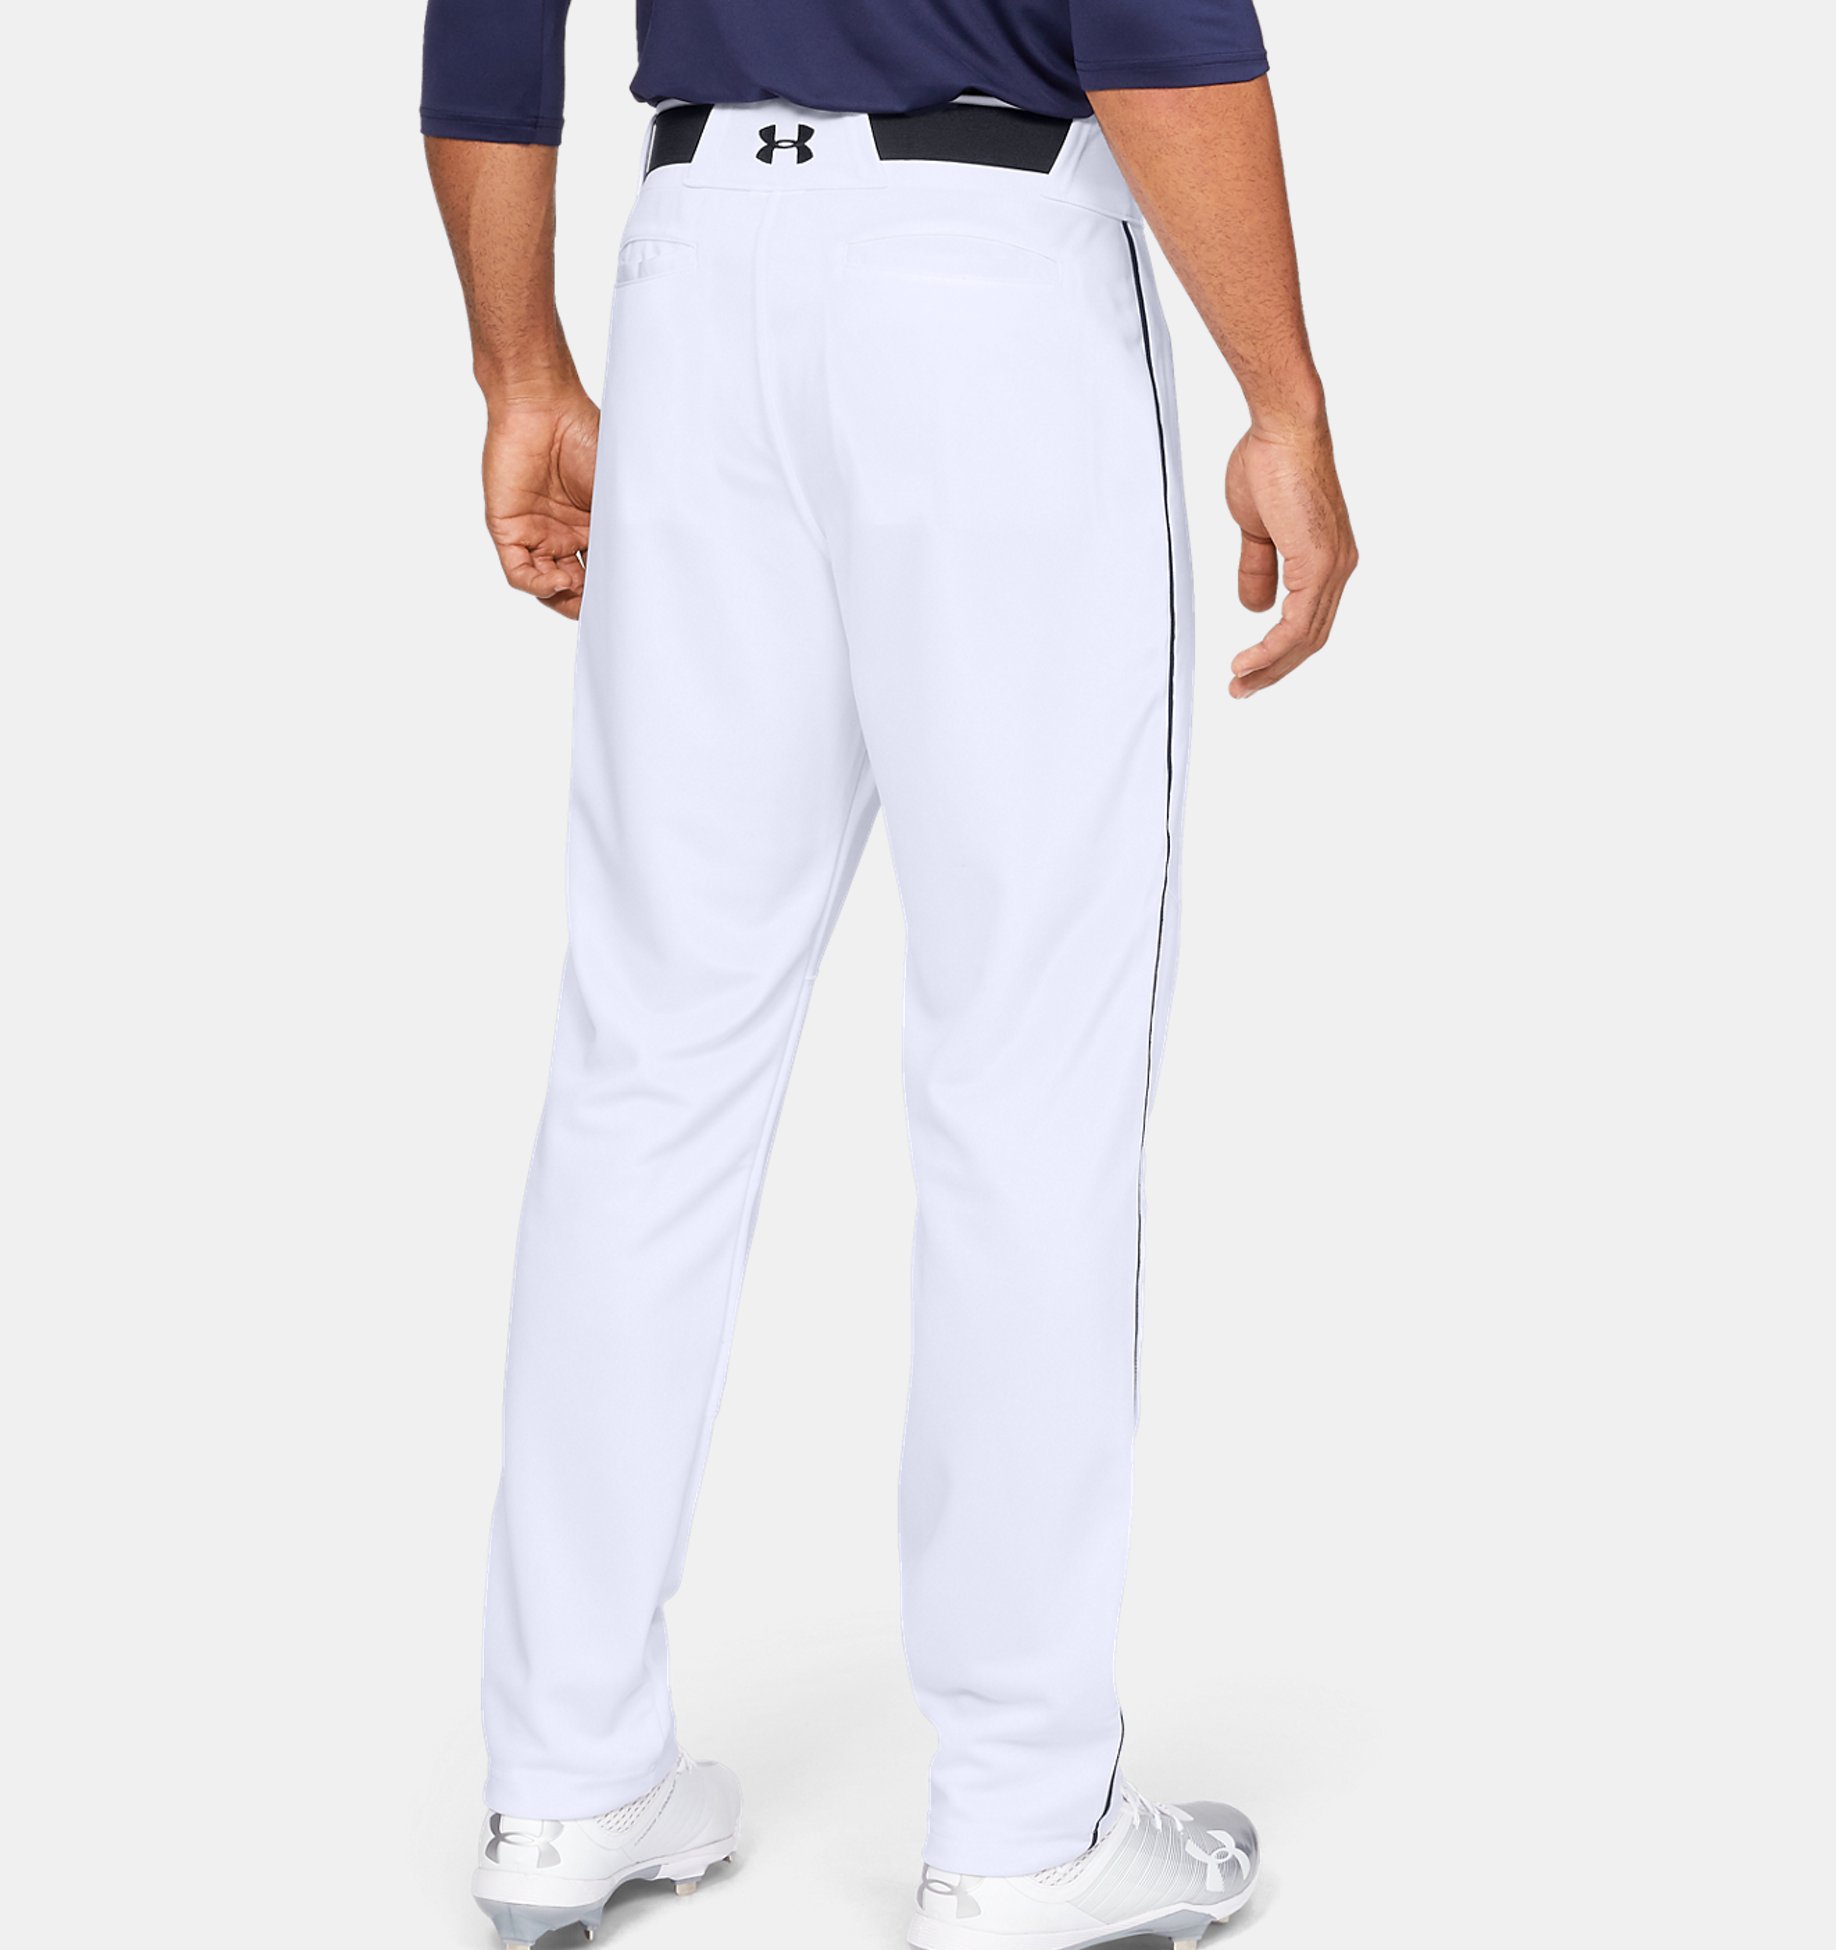 Under Armour Men's Ace Relaxed Piped Baseball Pant 